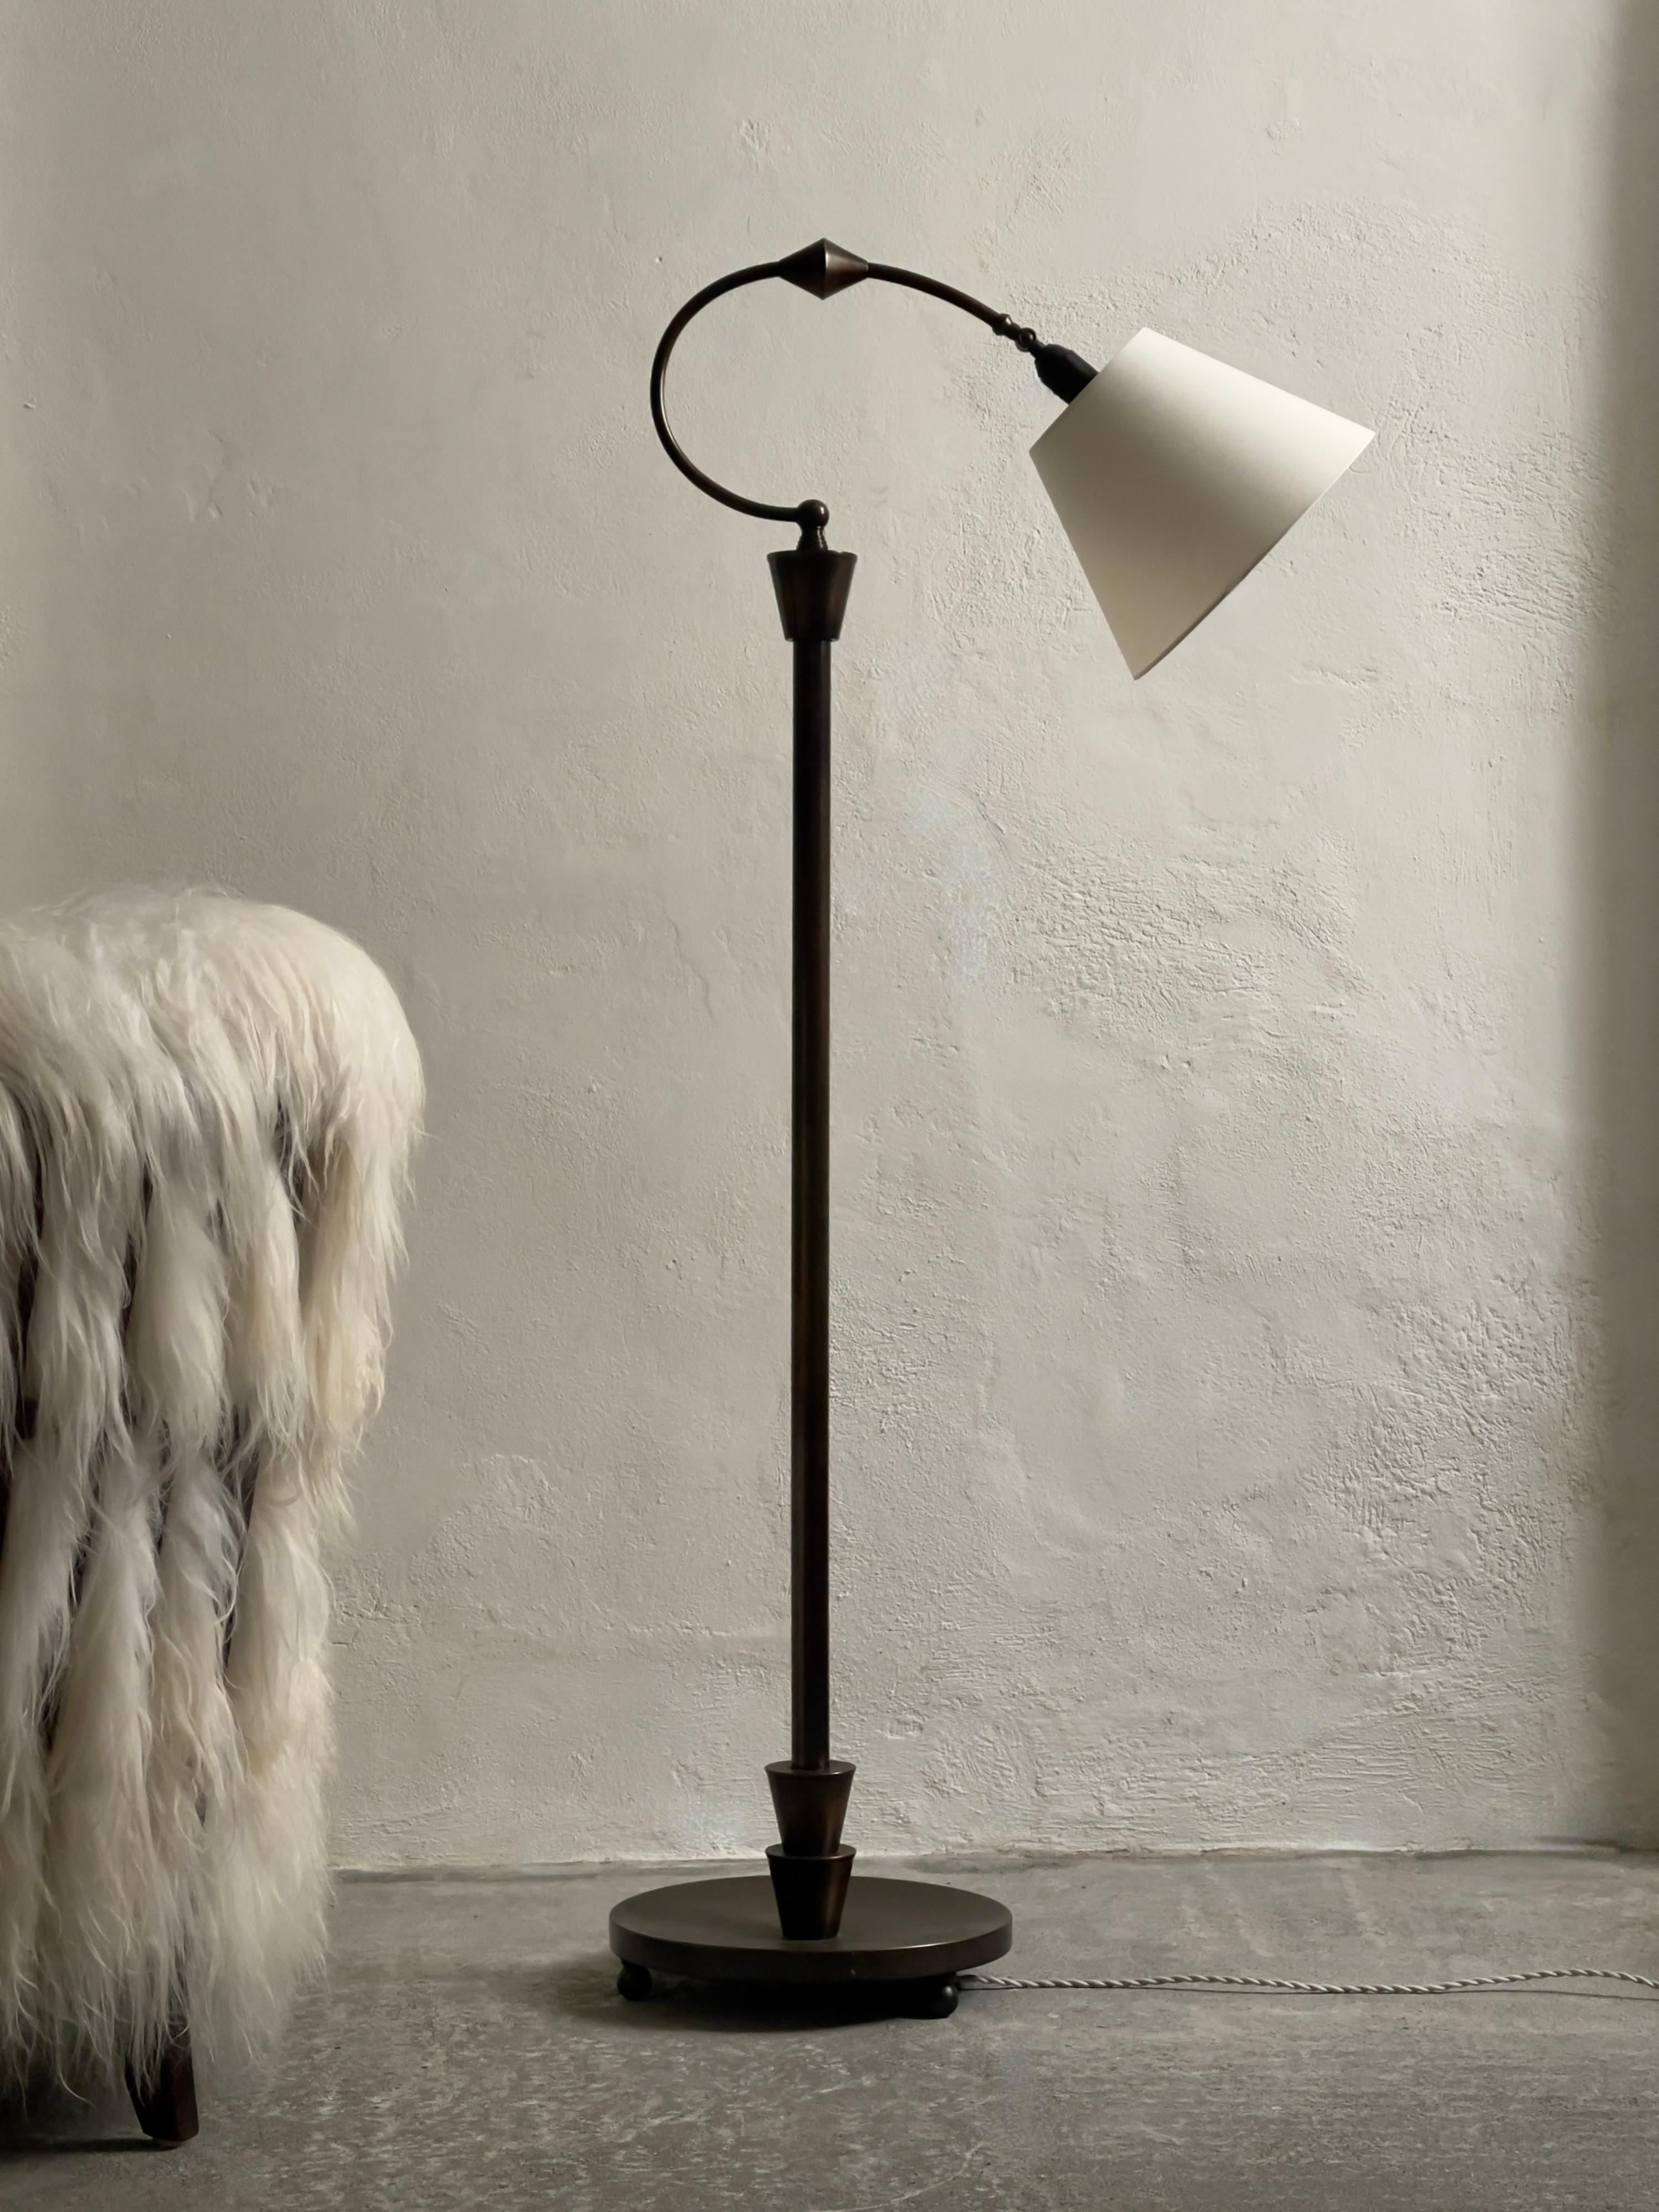 Unique 1920s Scandinavian Art deco floor lamp in patinated bronze with new linen shade. 
Please find measures:
Base: 33 cm
Height: 147- 194 cm (The upper core part of this lamp can be extended)
Wide: 56 cm

We are delighted to unveil a unique and